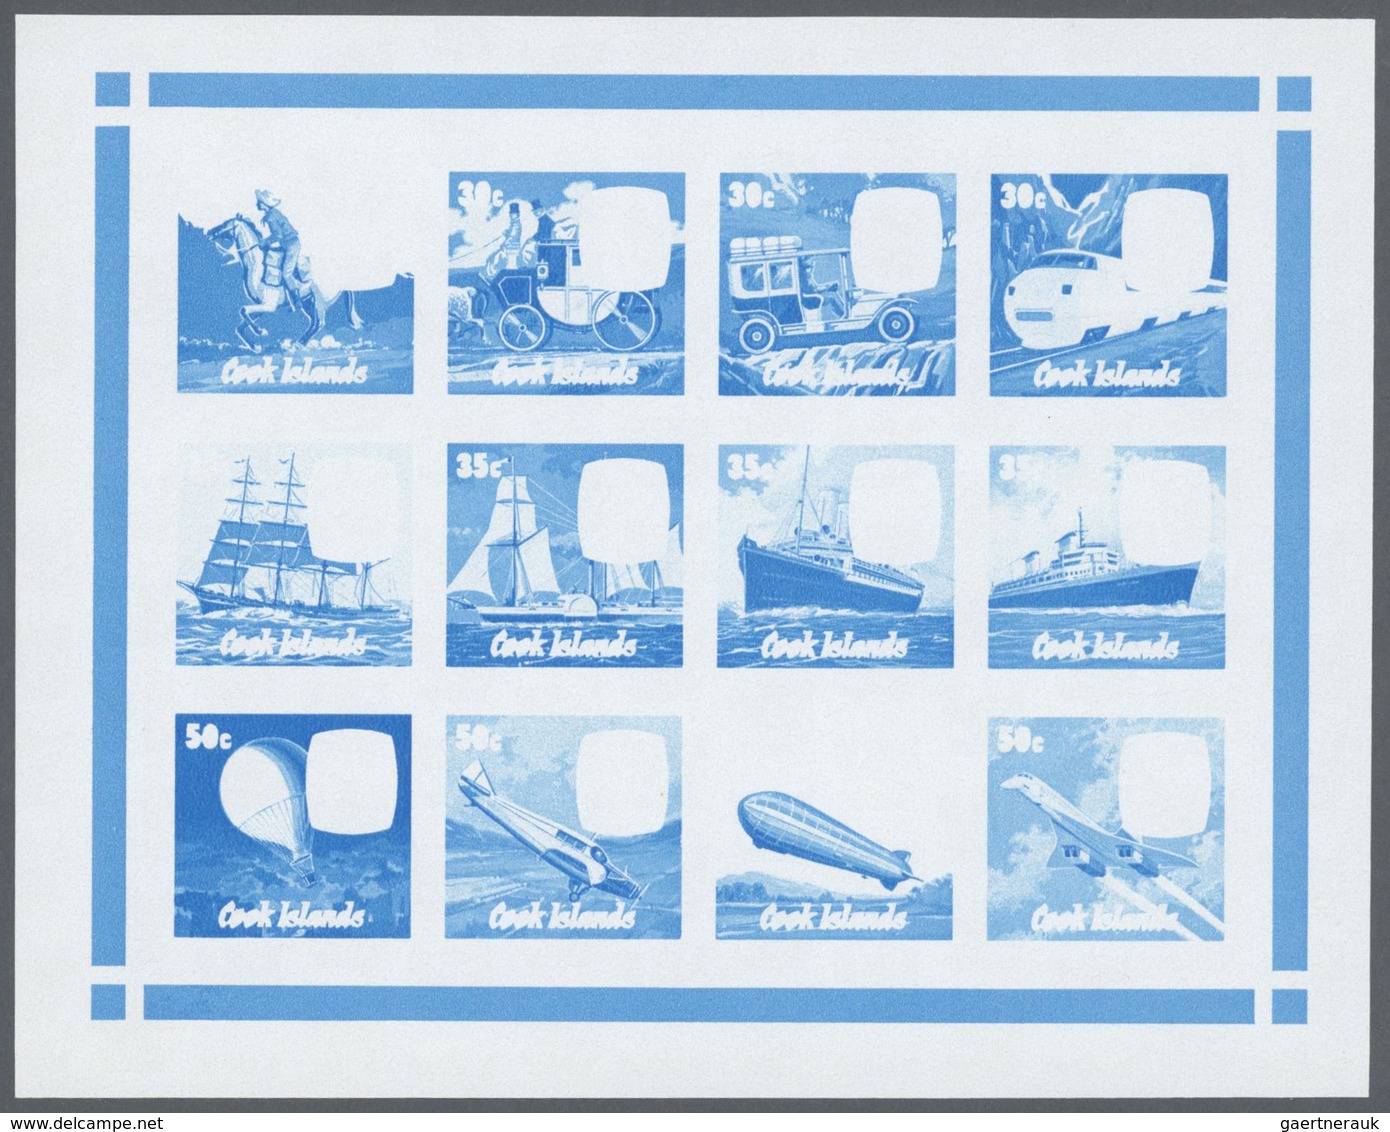 25871 Thematik: Verkehr / traffic: 1979, Cook Islands. Progressive proofs for the souvenir sheet of the is